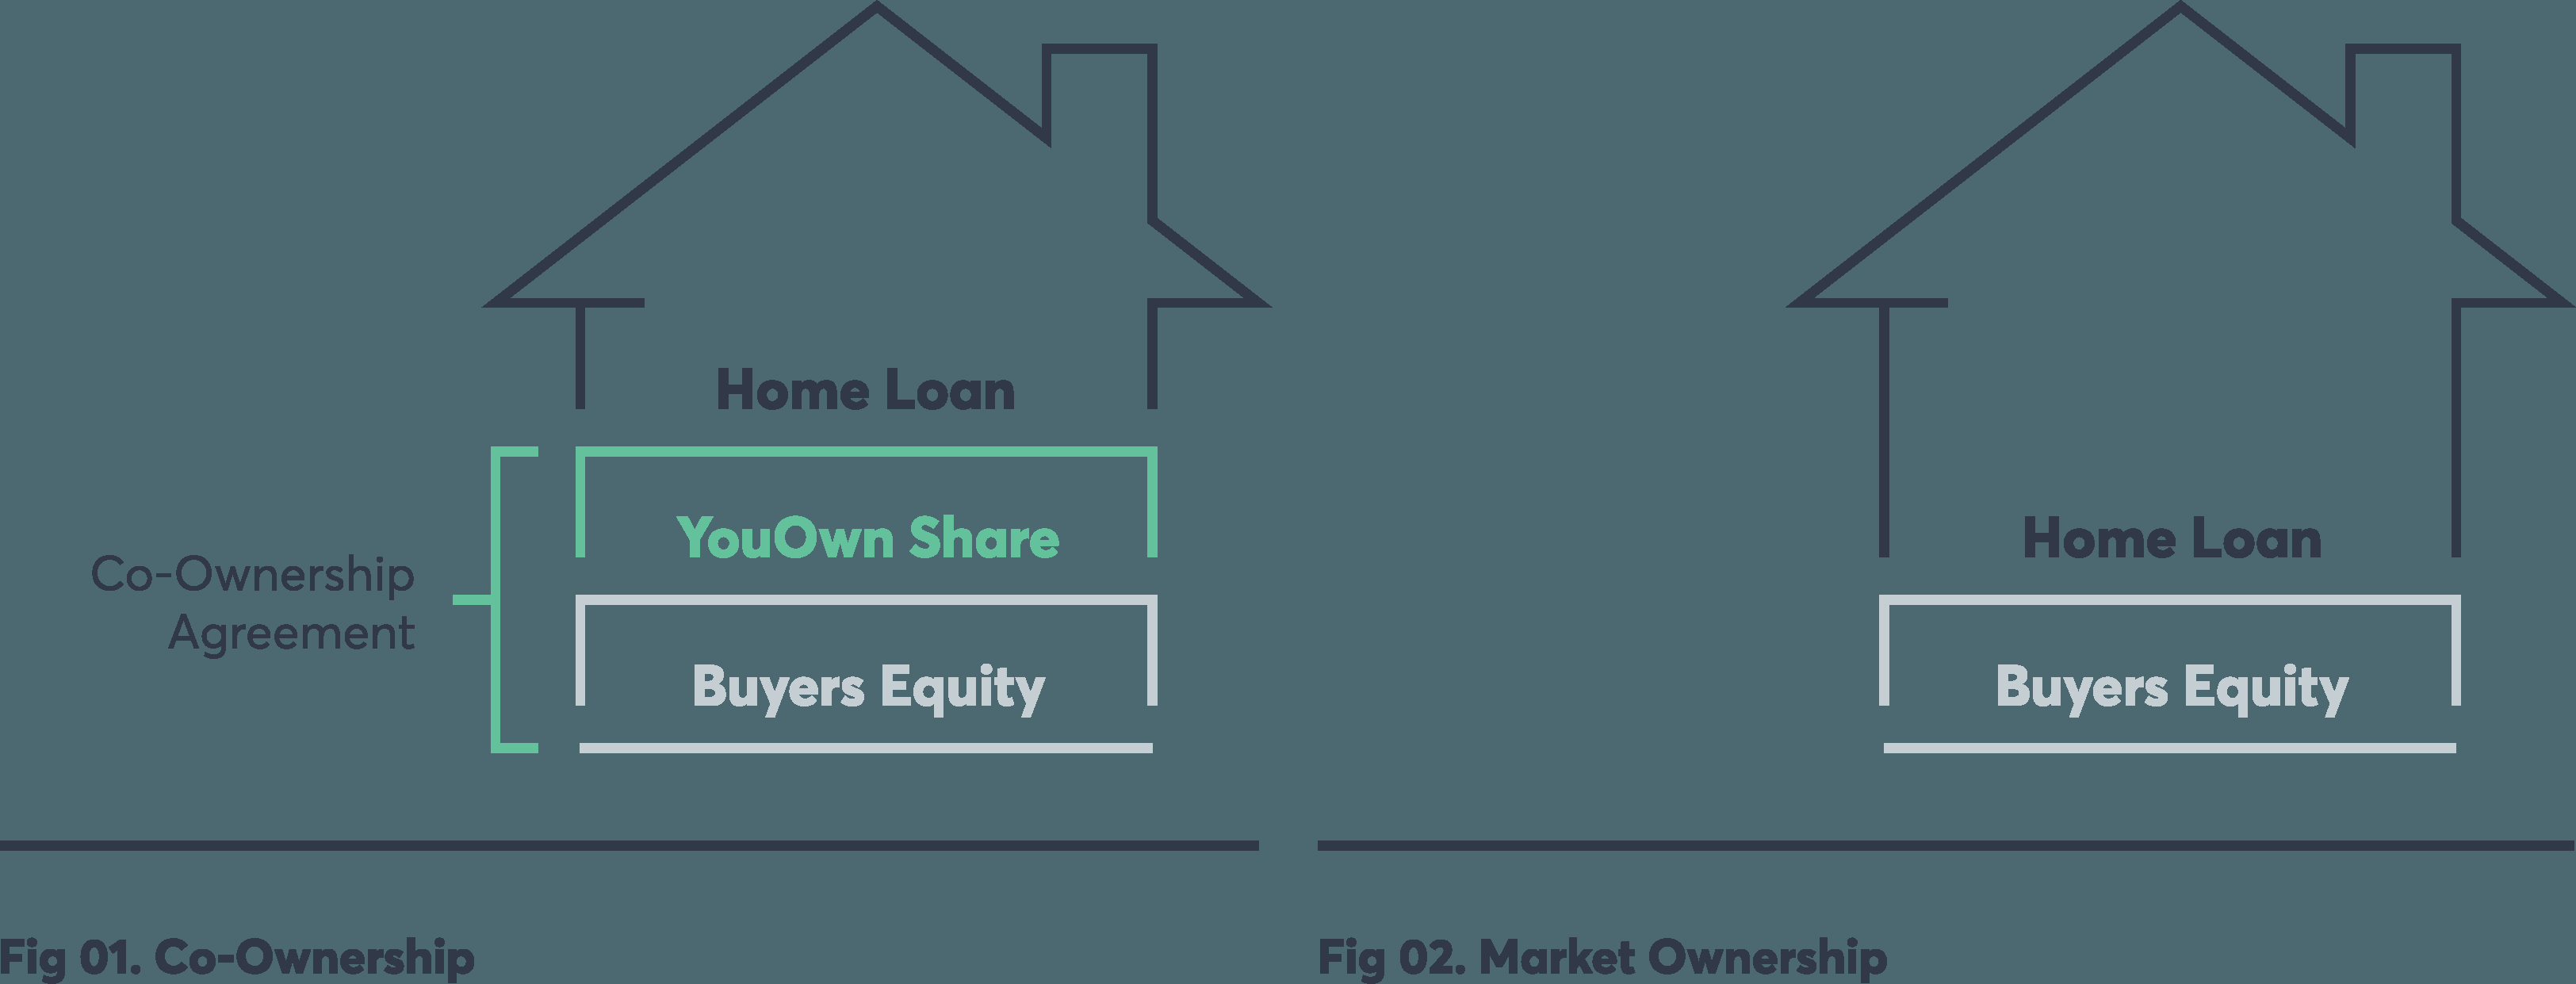 Shared Equity Financing Agreement Youown A Helping Hand To First Home Buyersthe First Home Buyers